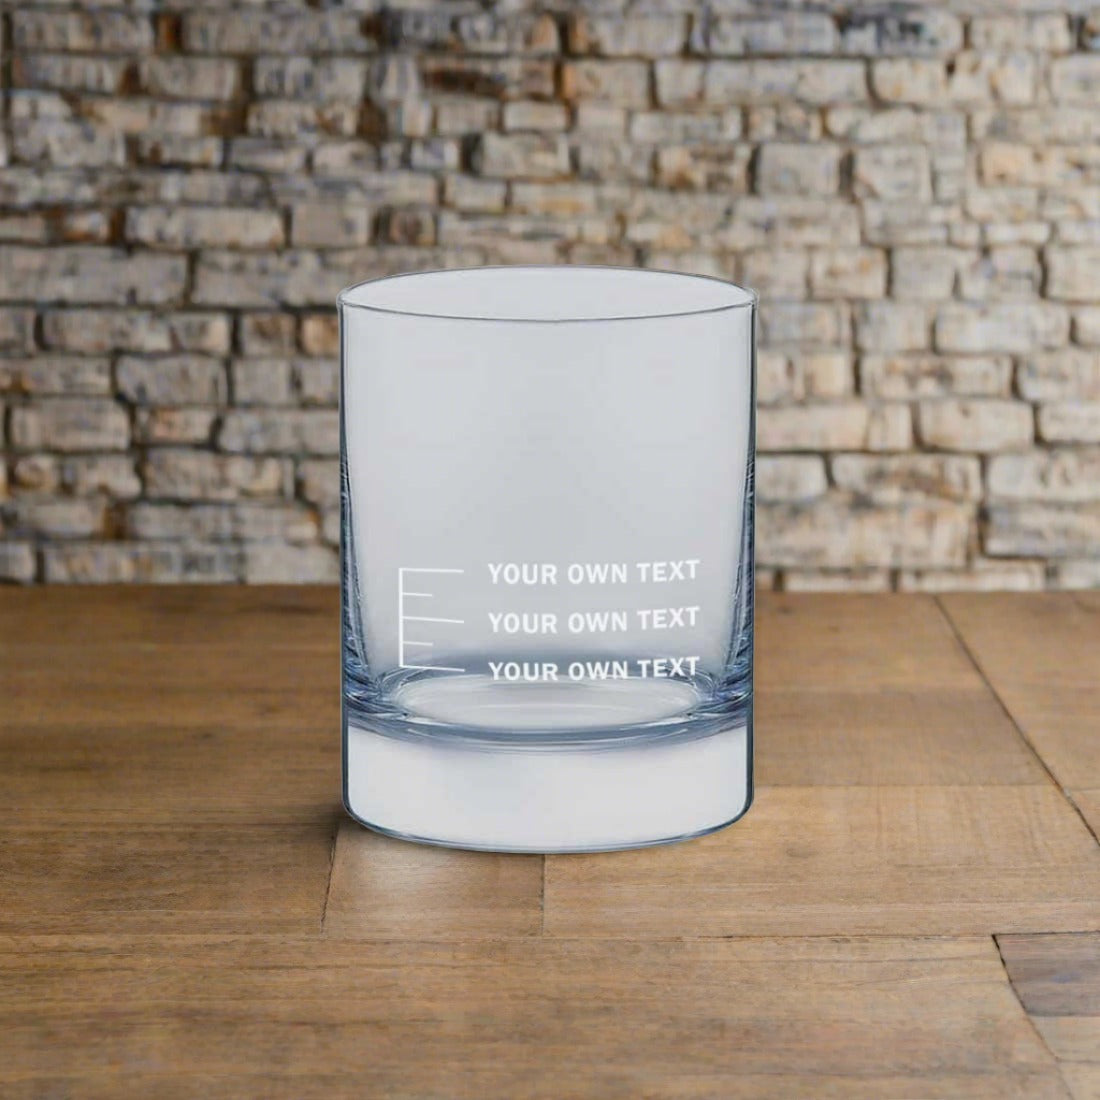 Personalized Whiskey Glass With Measurement Marking - Add Your Own